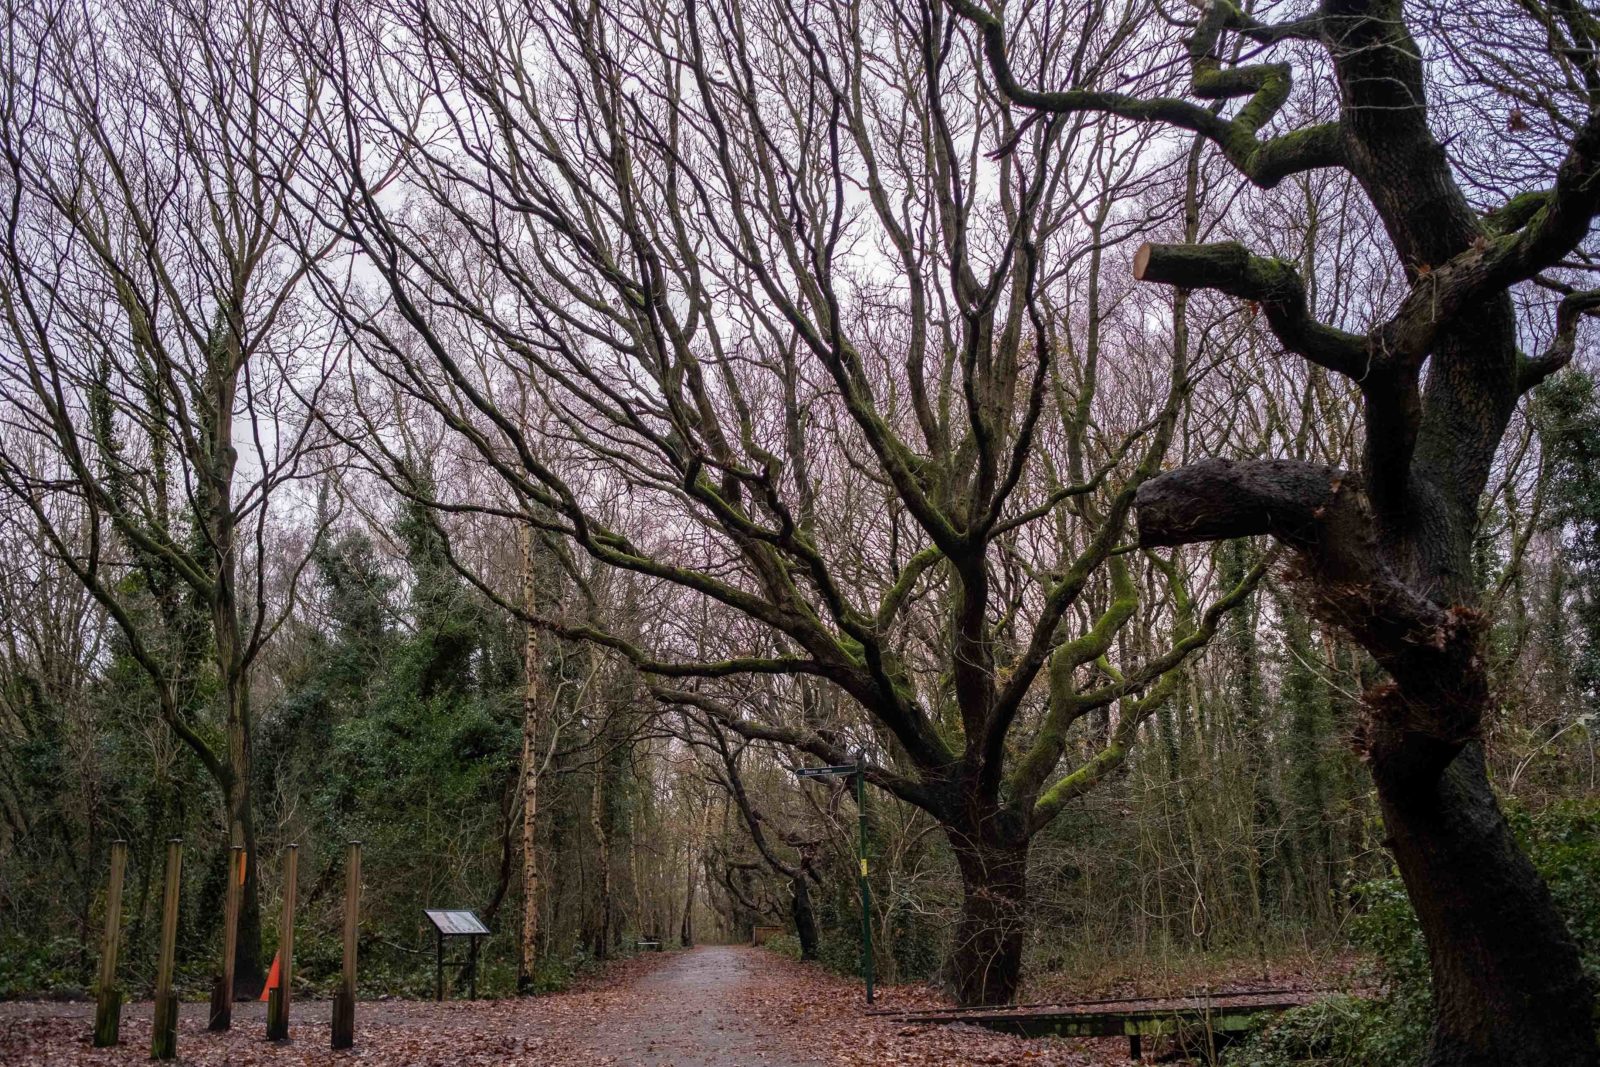 Photograph of winter trees in Halewood Park